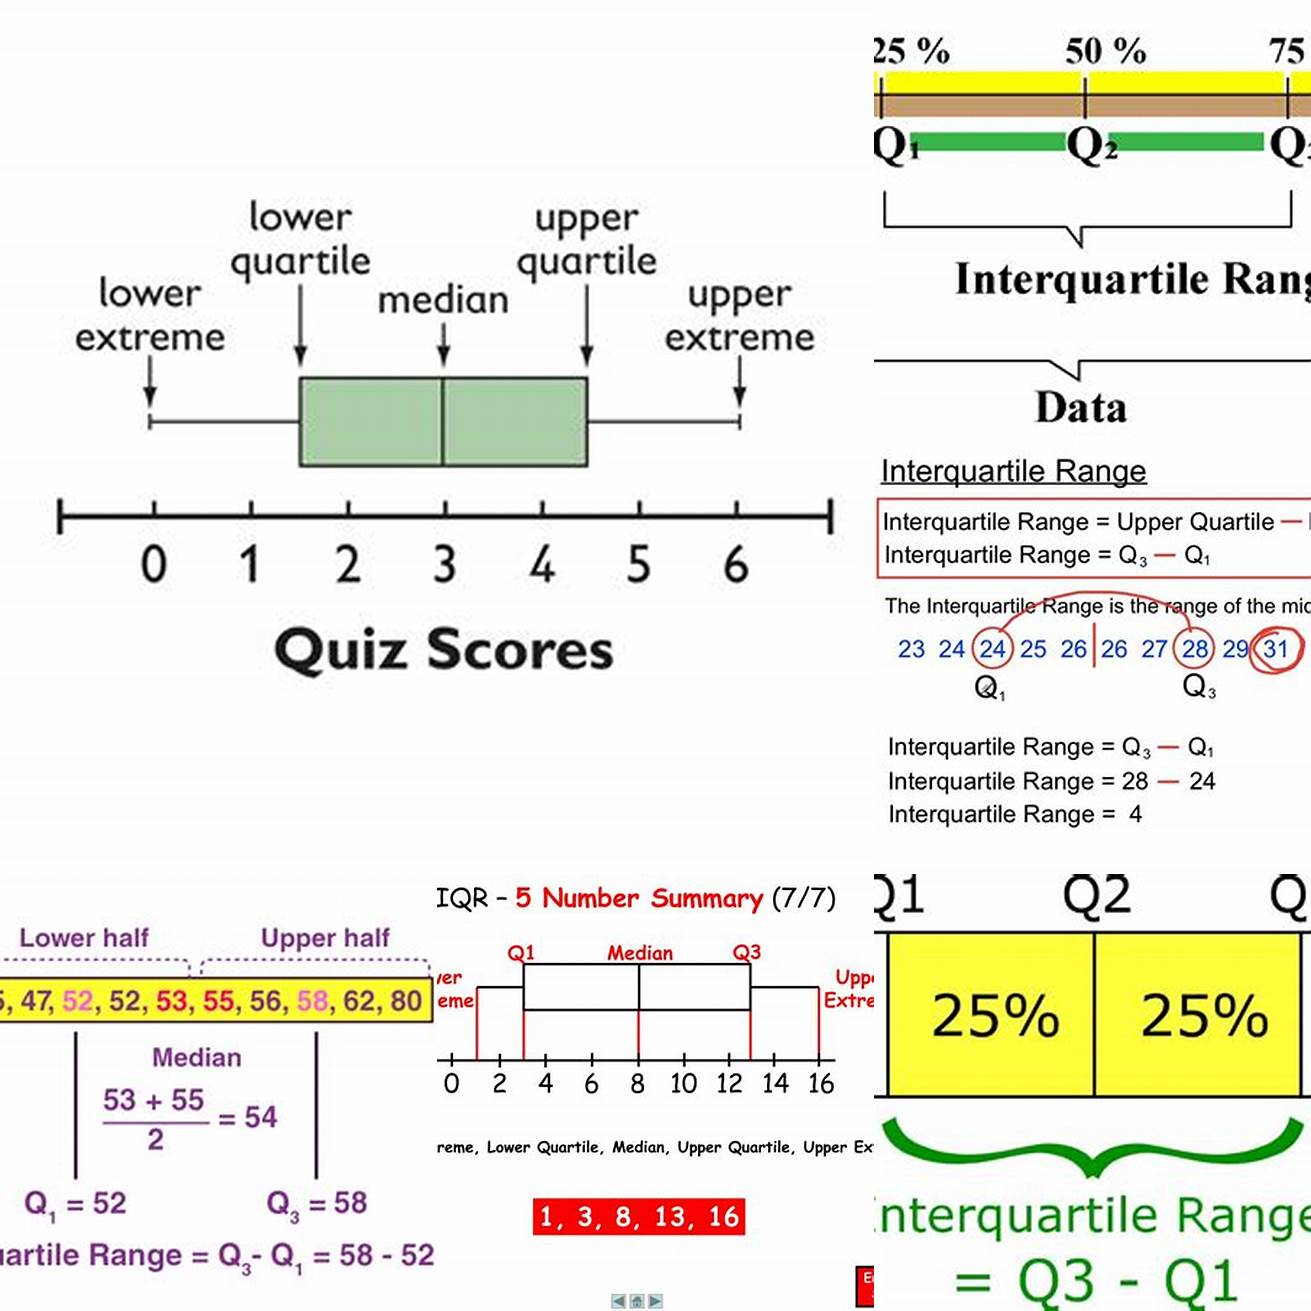 Calculate the interquartile range IQR which is the difference between the upper quartile and the lower quartile